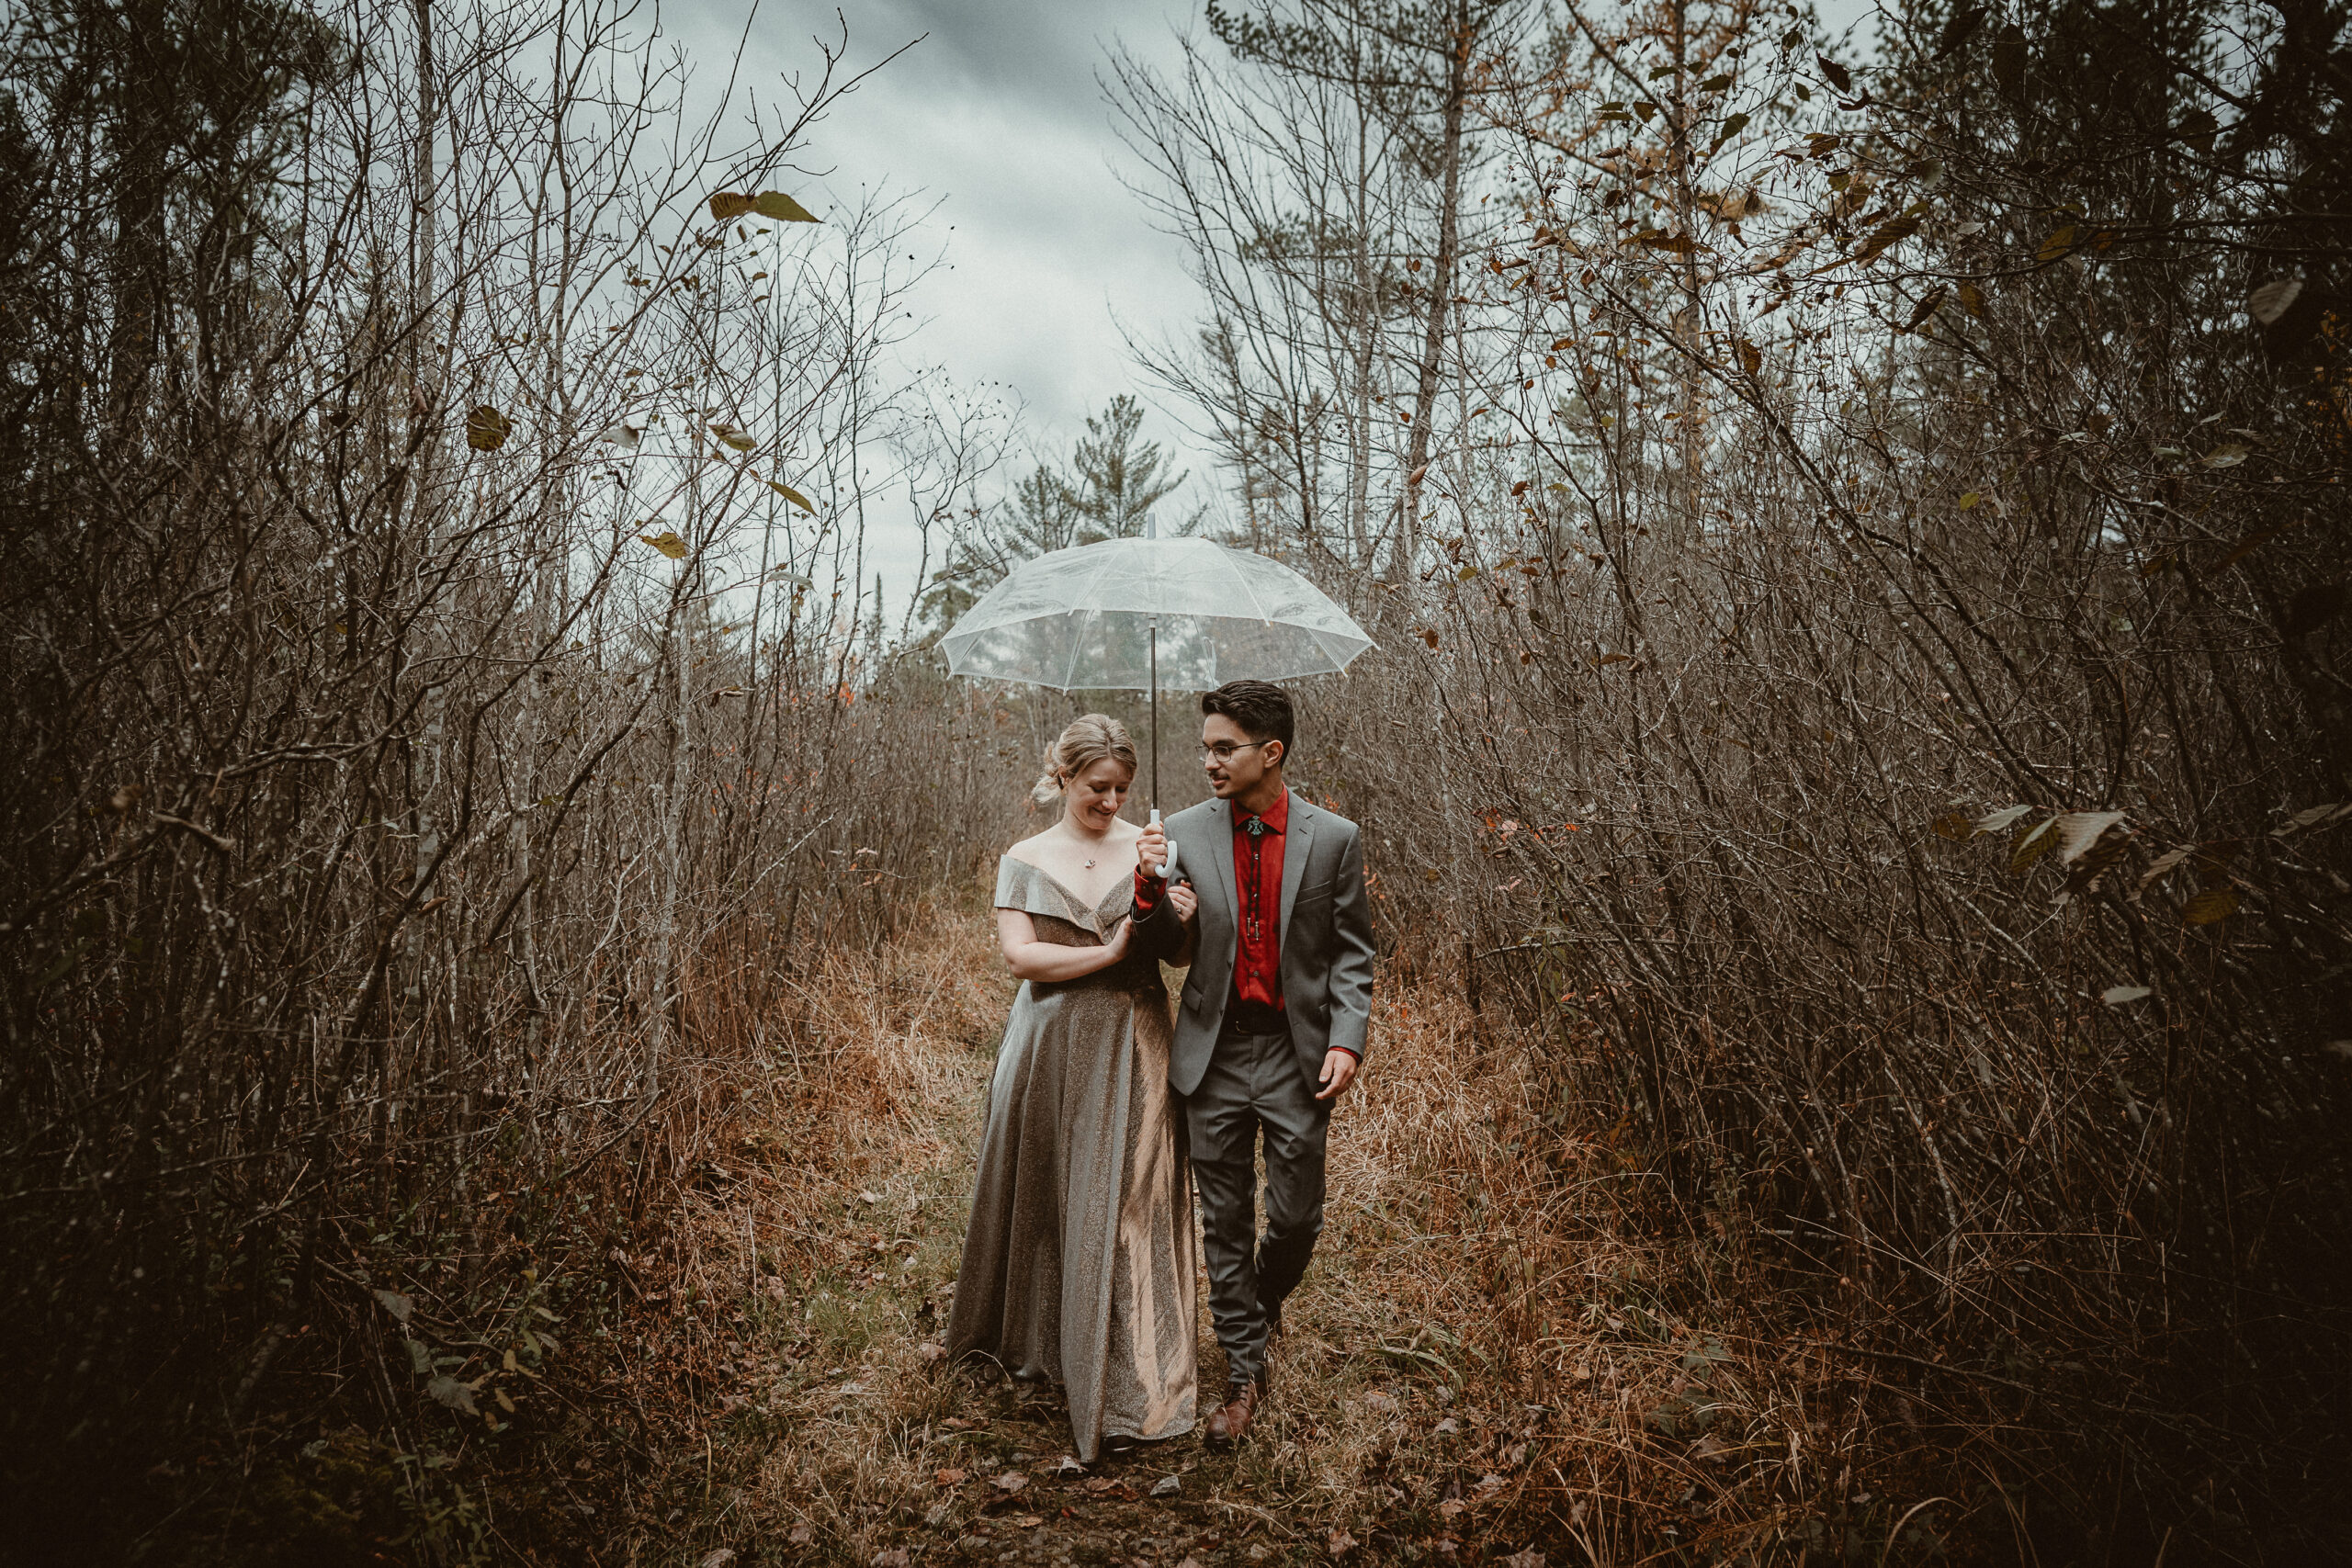 Bride and Groom walking in the woods in the rain with a clear umbrella.